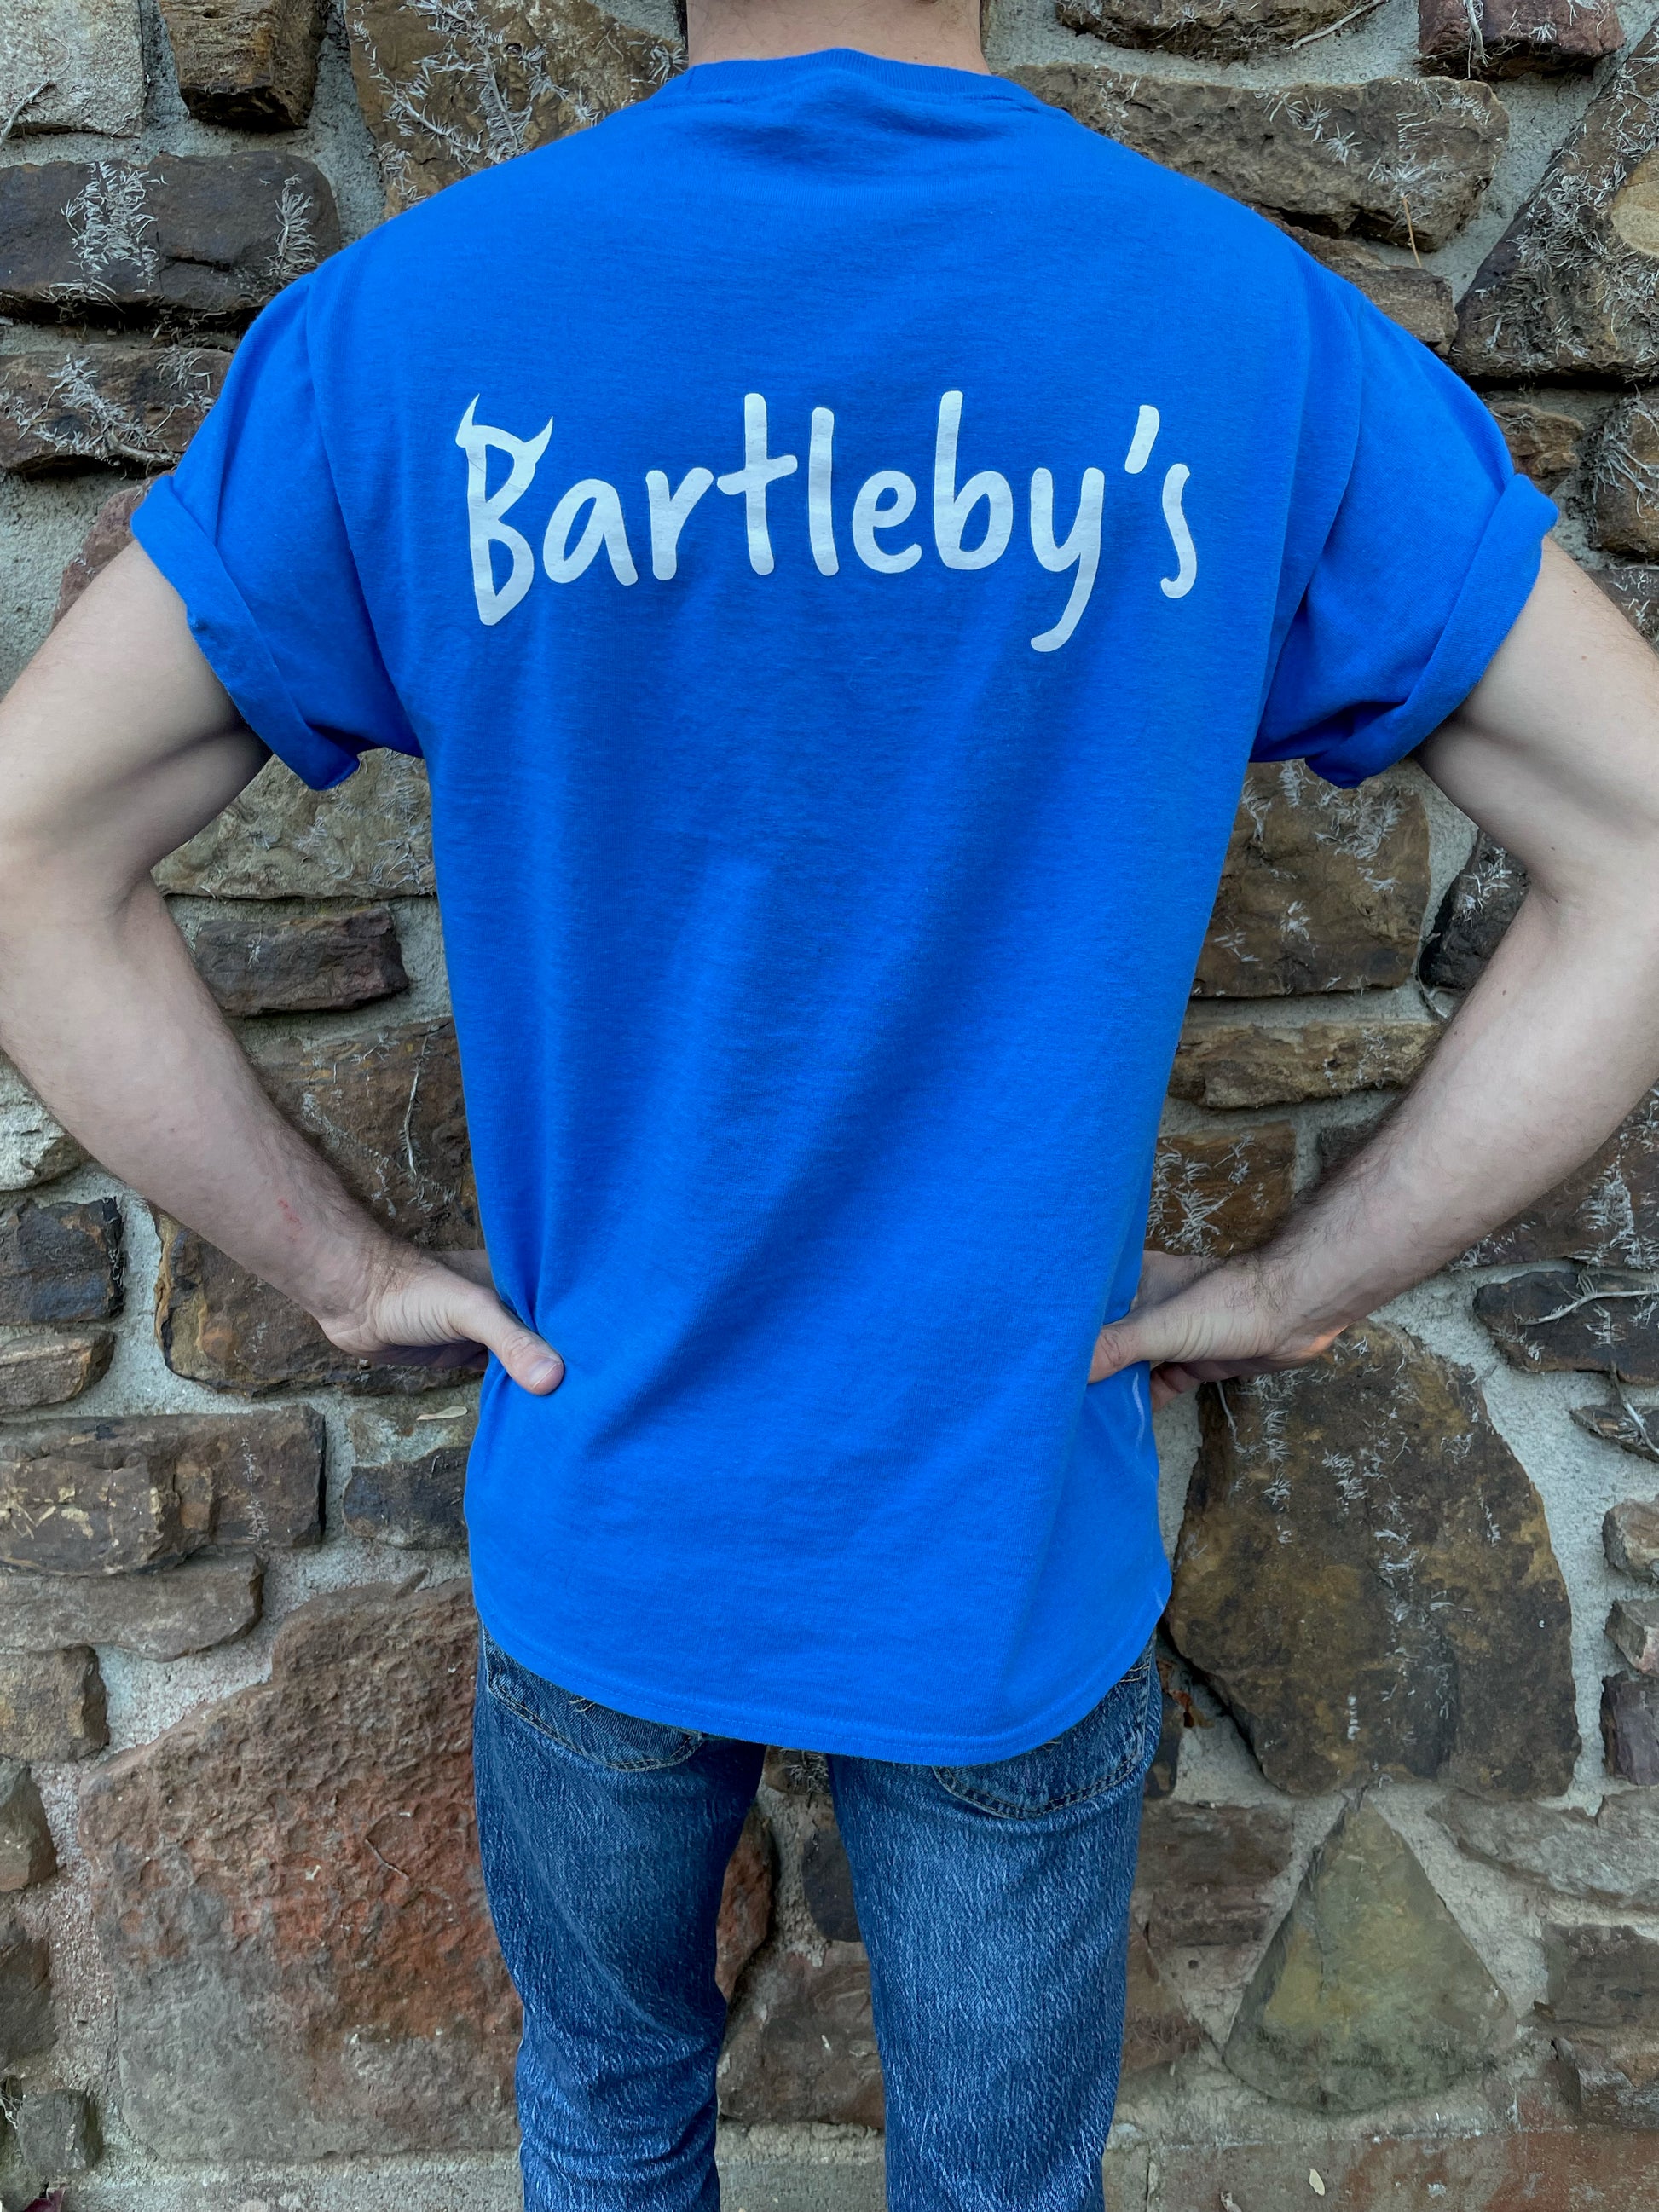 Bring your favorite baby devil, Bartleby, with you where ever you go, tucked in your t-shirt pocket right next to your heart. This blue T-shirt with the devil in the pocket is fun, quirky, and cute, with "Bartleby's" written on the back between the shoulders, allowing you to rep your favorite small woman-owned business. T-shirts ship free!